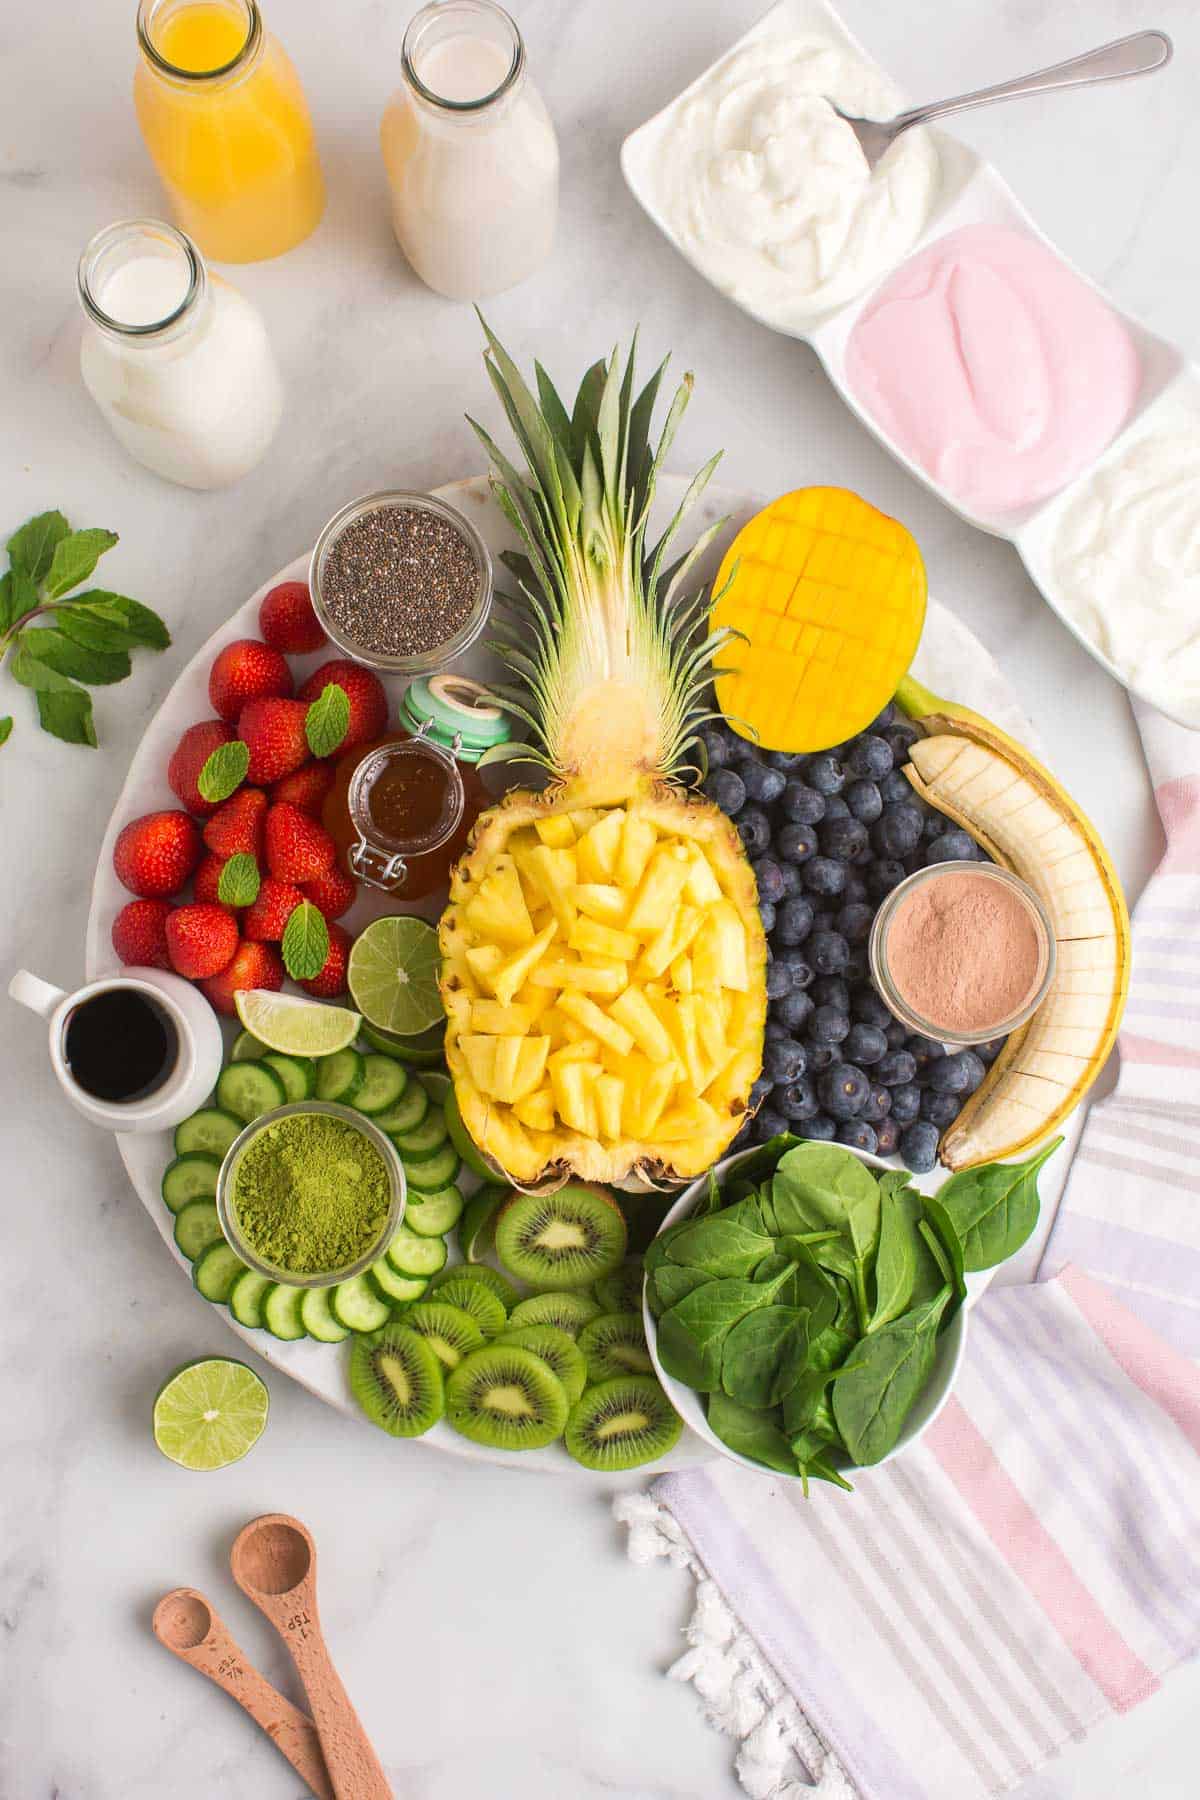 Completed smoothie board with a pineapple half in the middle.